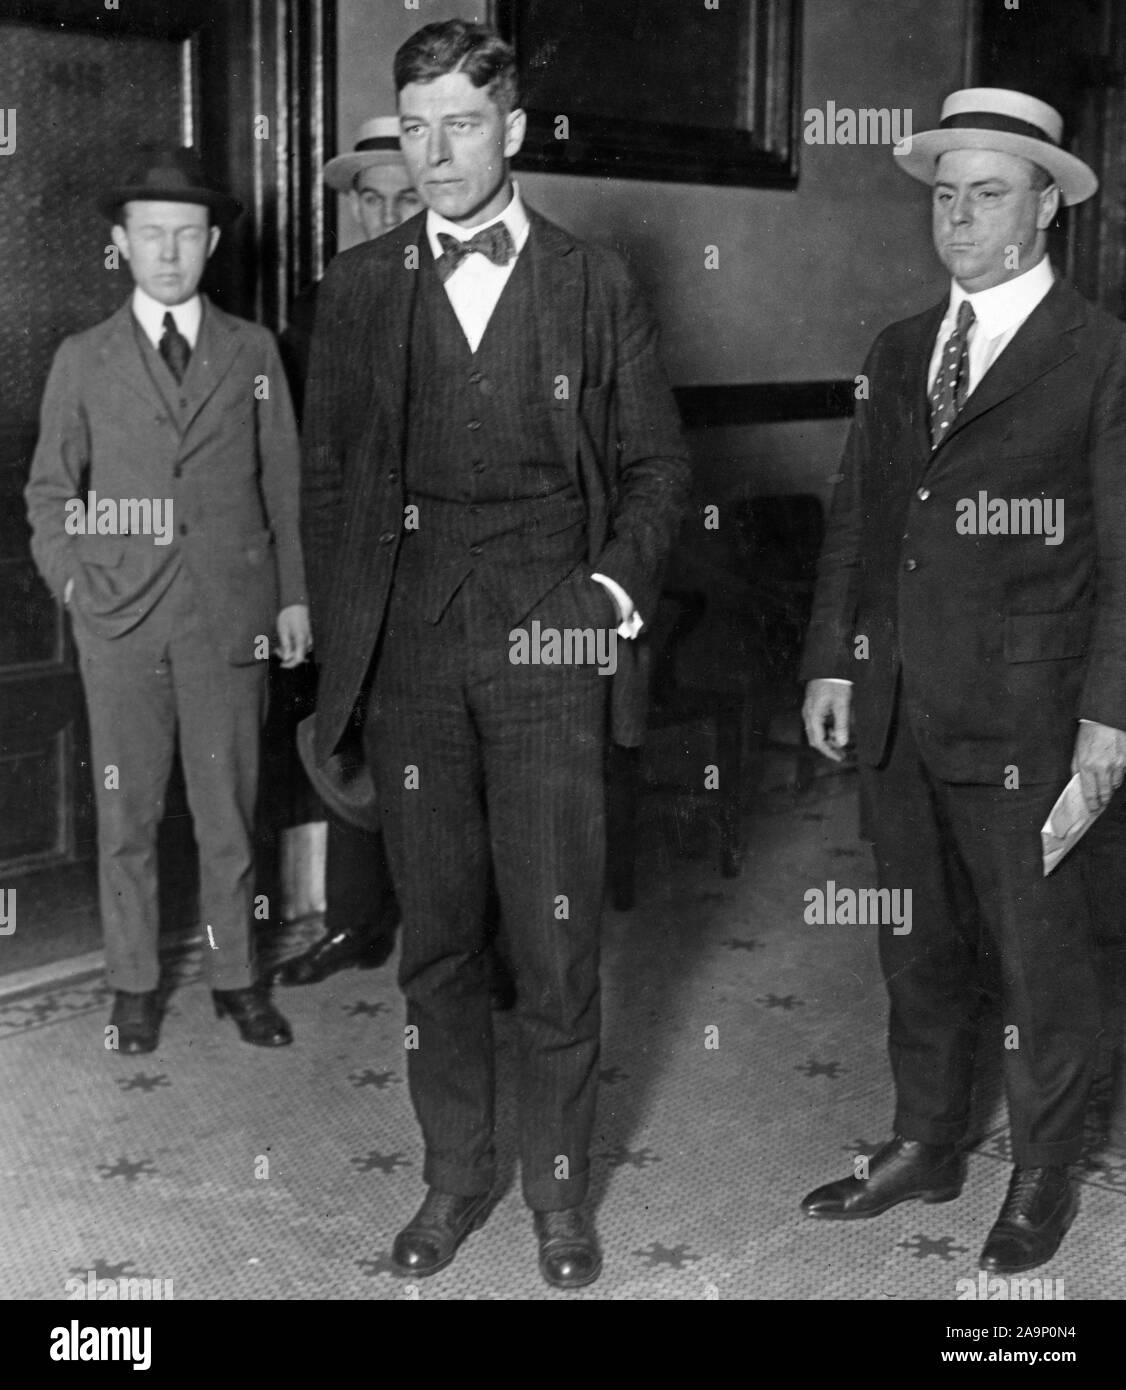 1918 - Arrest of Alien Enemies in U.S.A. - Jeremiah O'Leary in Federal custody. Jeremiah O'Leary tracked by the Federal authorities in a country wide search was brought to New York June 18, 1918. Photo shows him being taken to the Federal Building after his arrival in the city Stock Photo